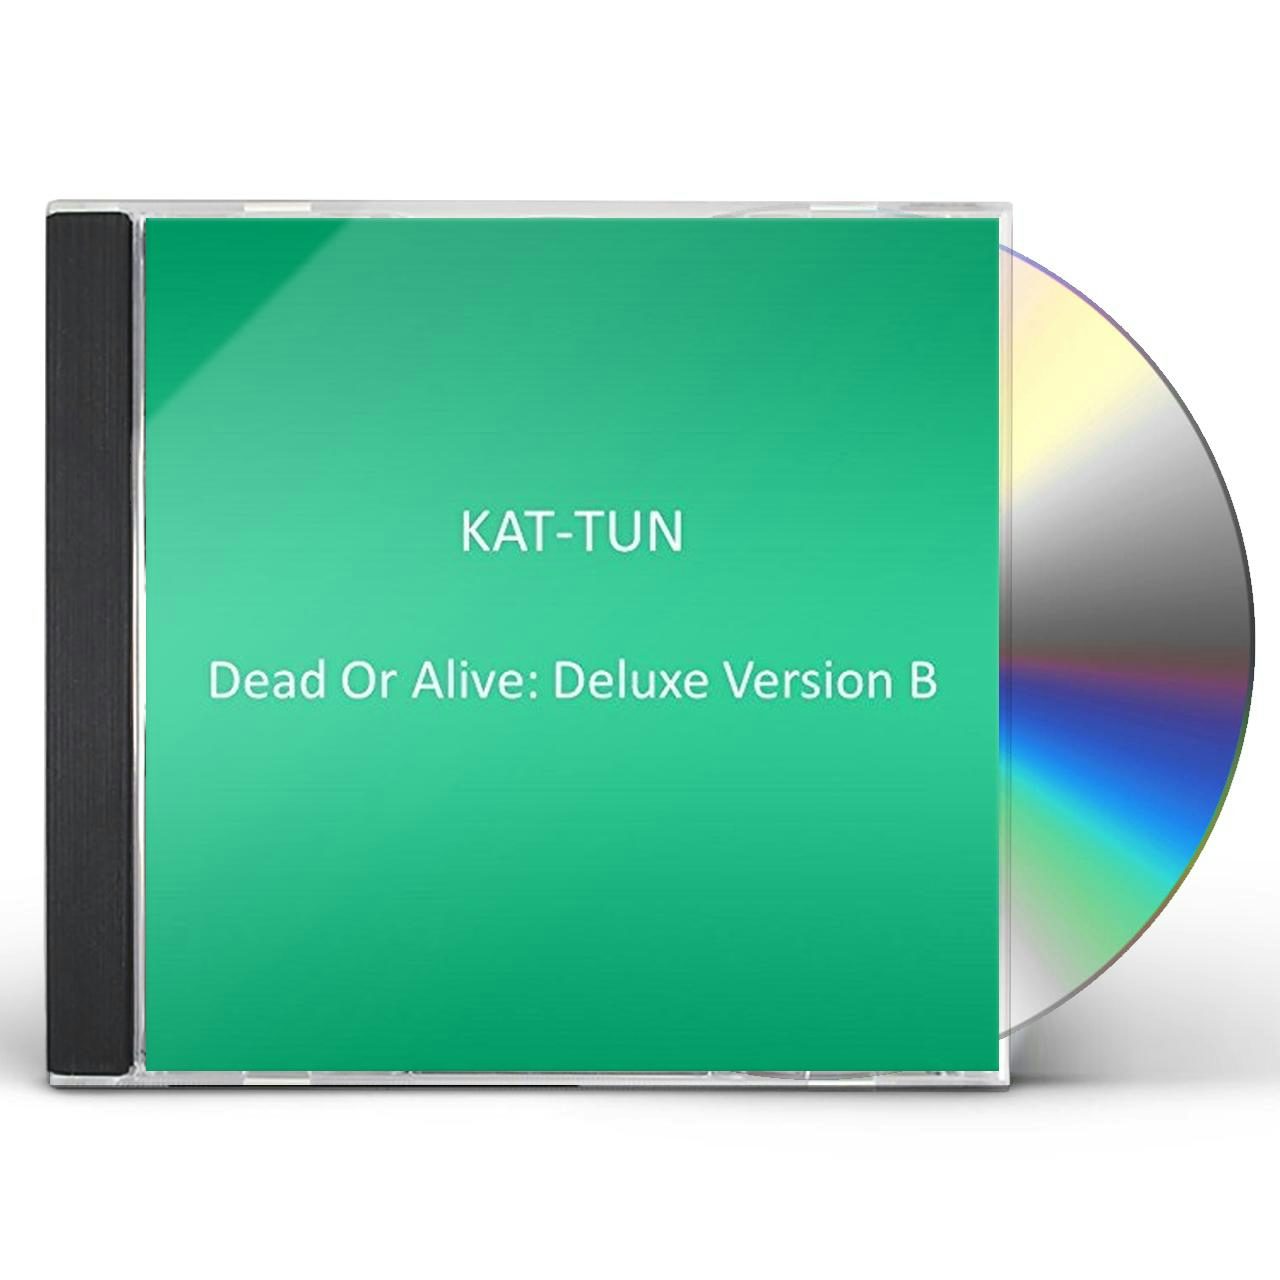 KAT-TUN DEAD OR ALIVE: DELUXE VERSION A CD